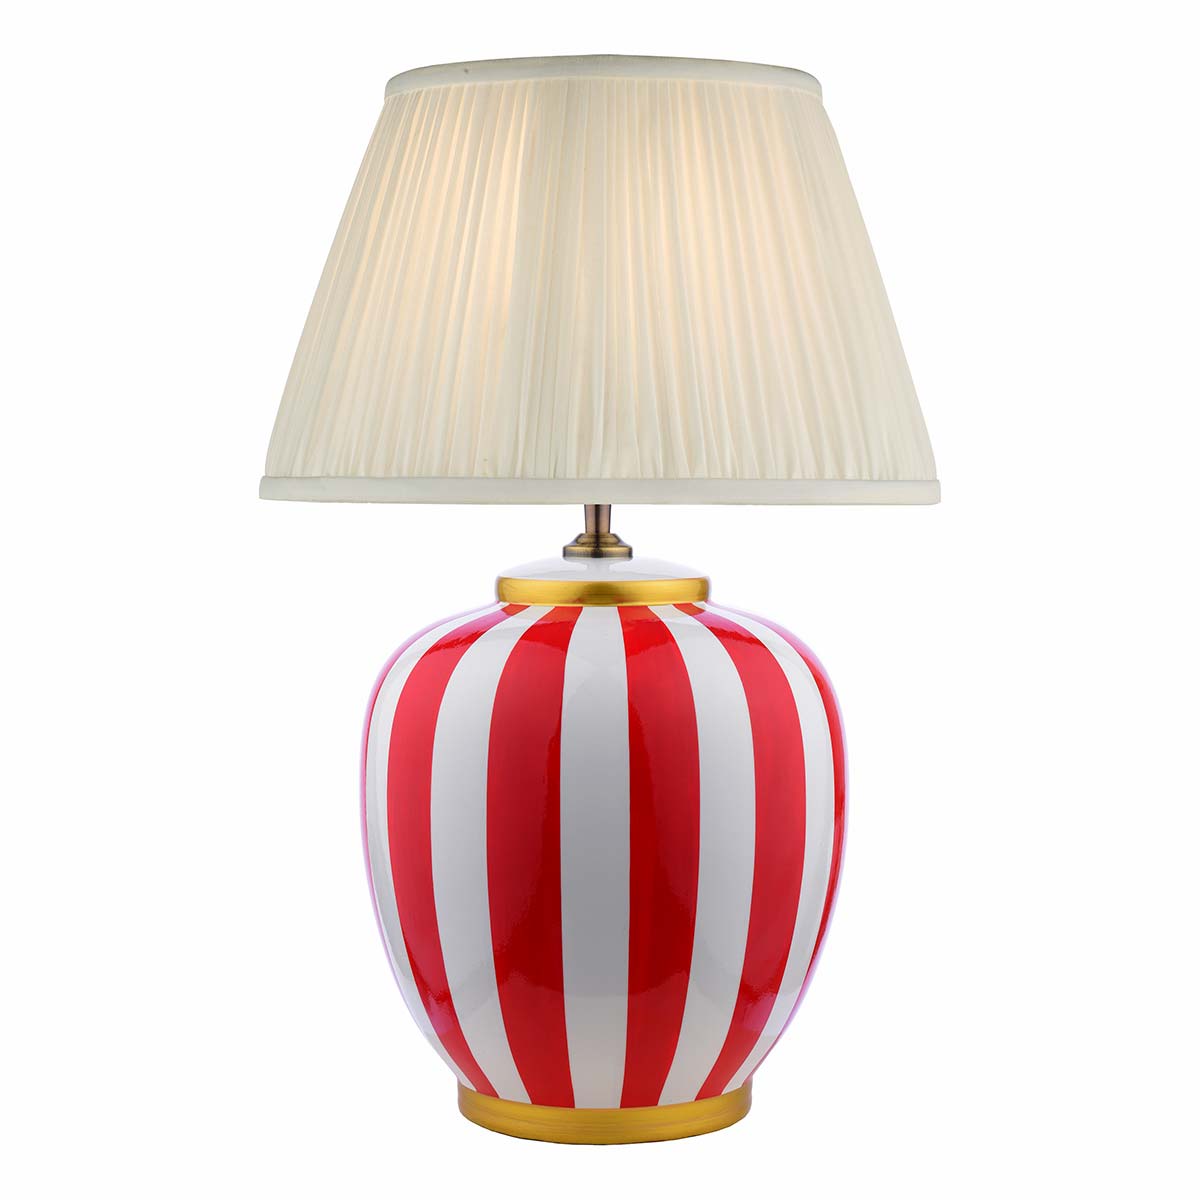 Dar Circus Red and White Ceramic Table Lamp Ivory Shade